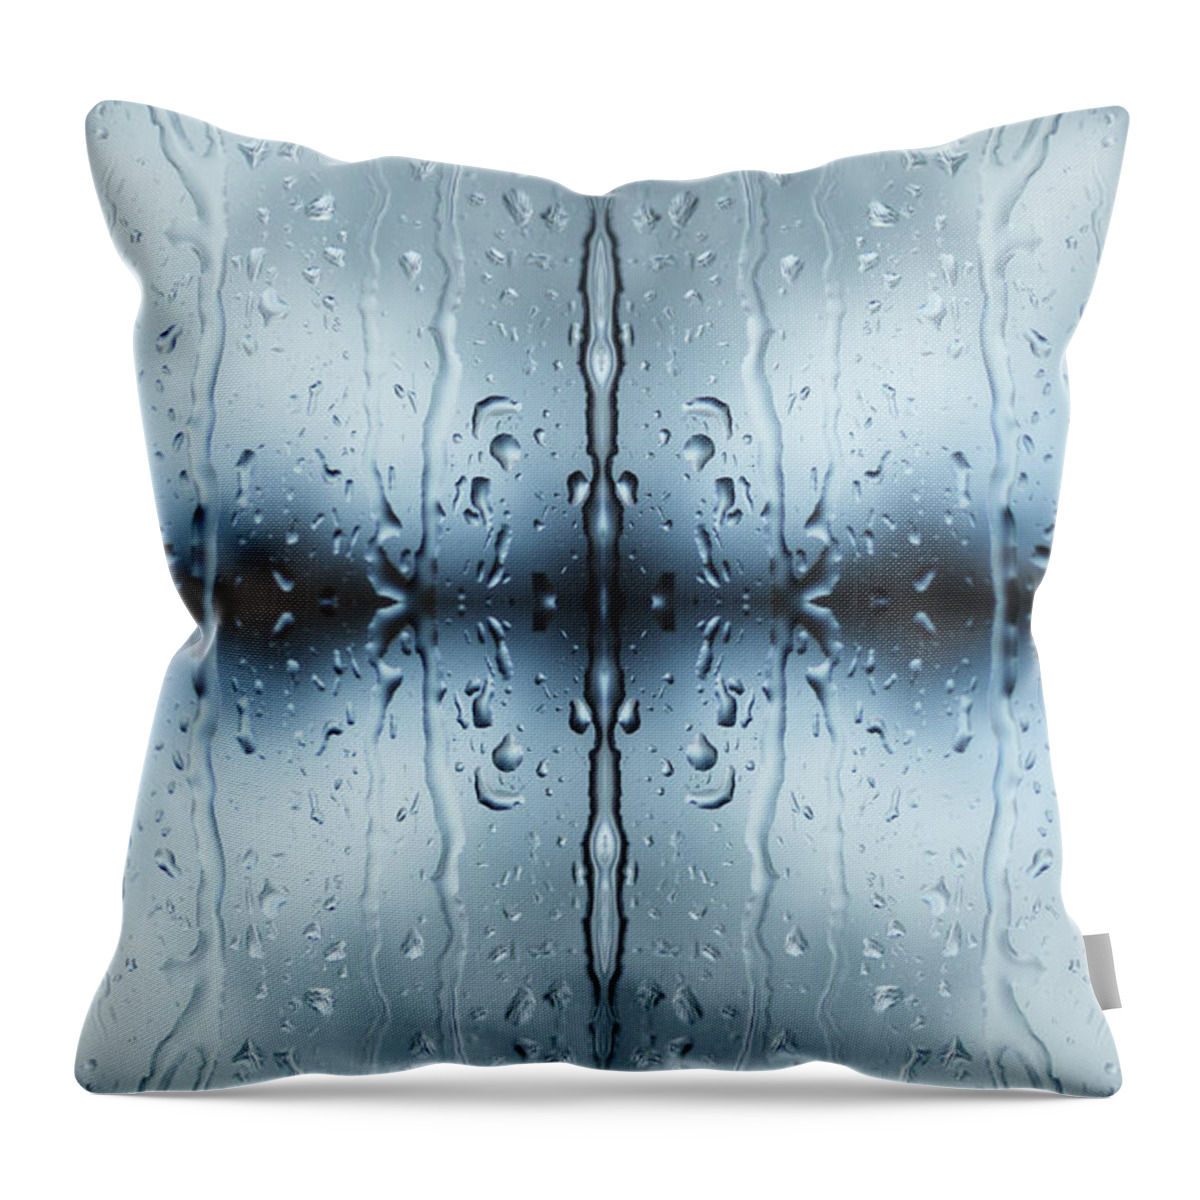 Transparent Throw Pillow featuring the photograph Rain On Window Pane by Silvia Otte